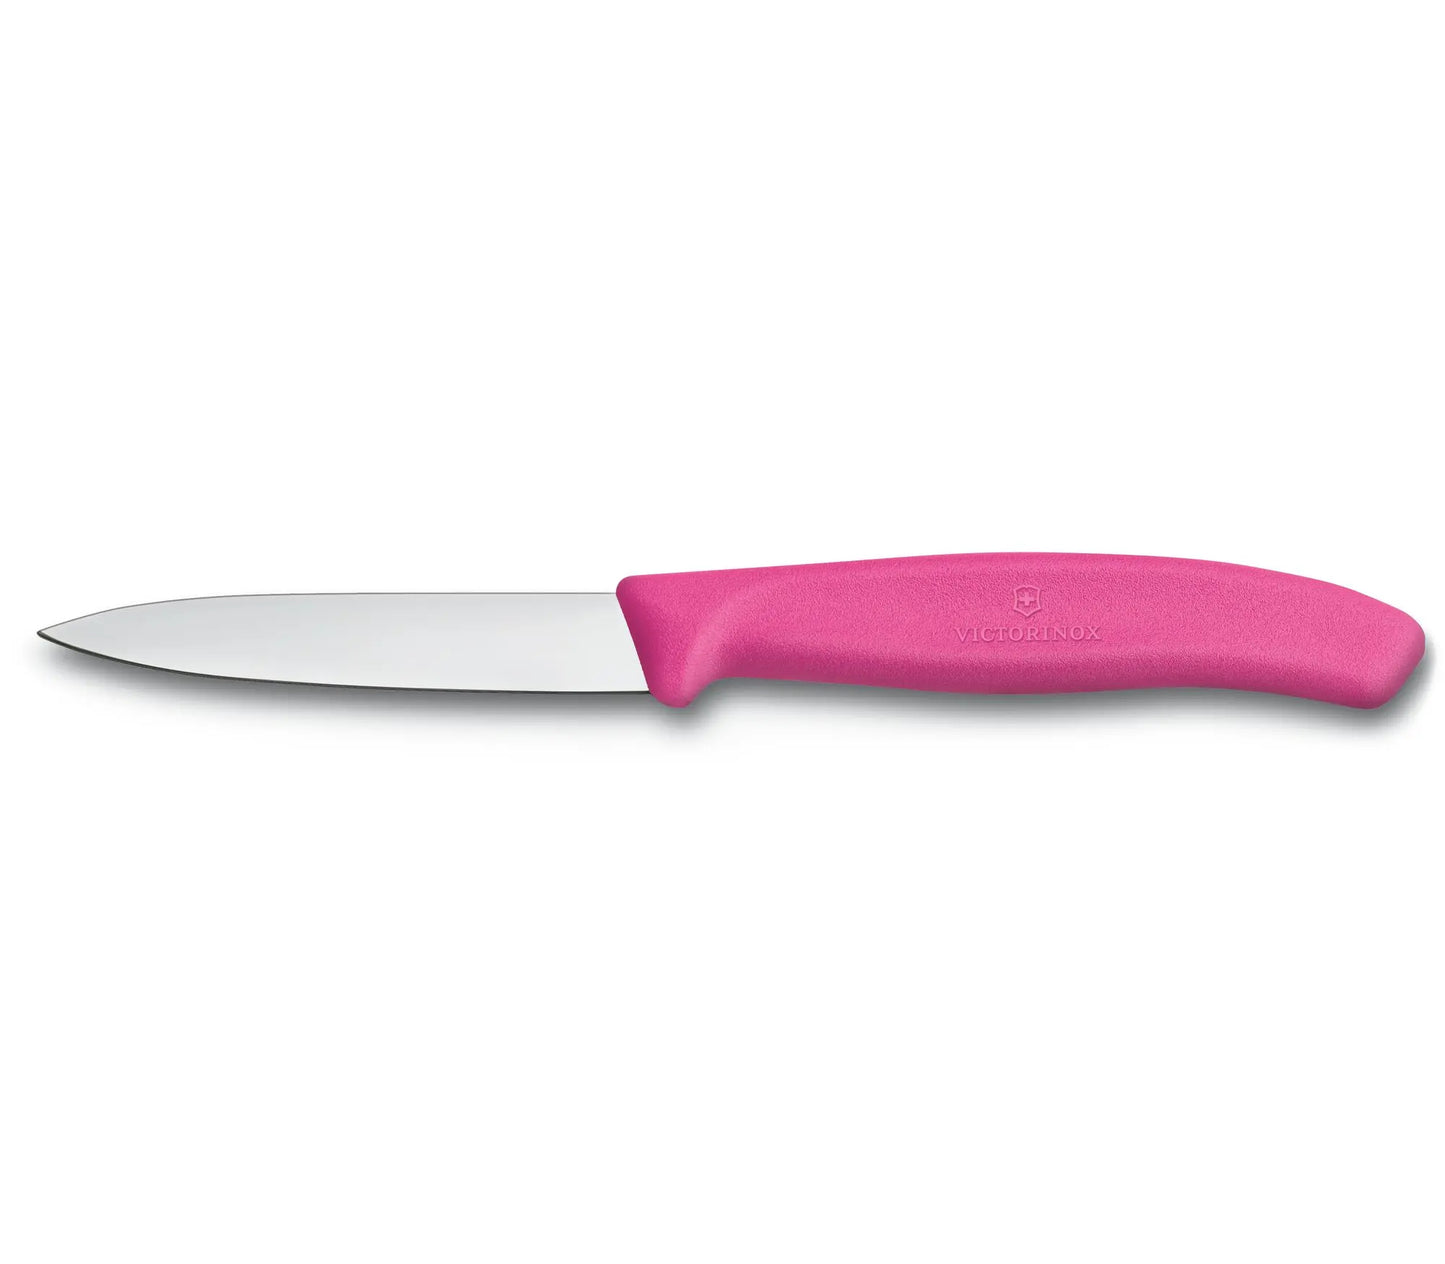 Victorinox Swiss Classic Paring Knife Pointed Tip - Pink